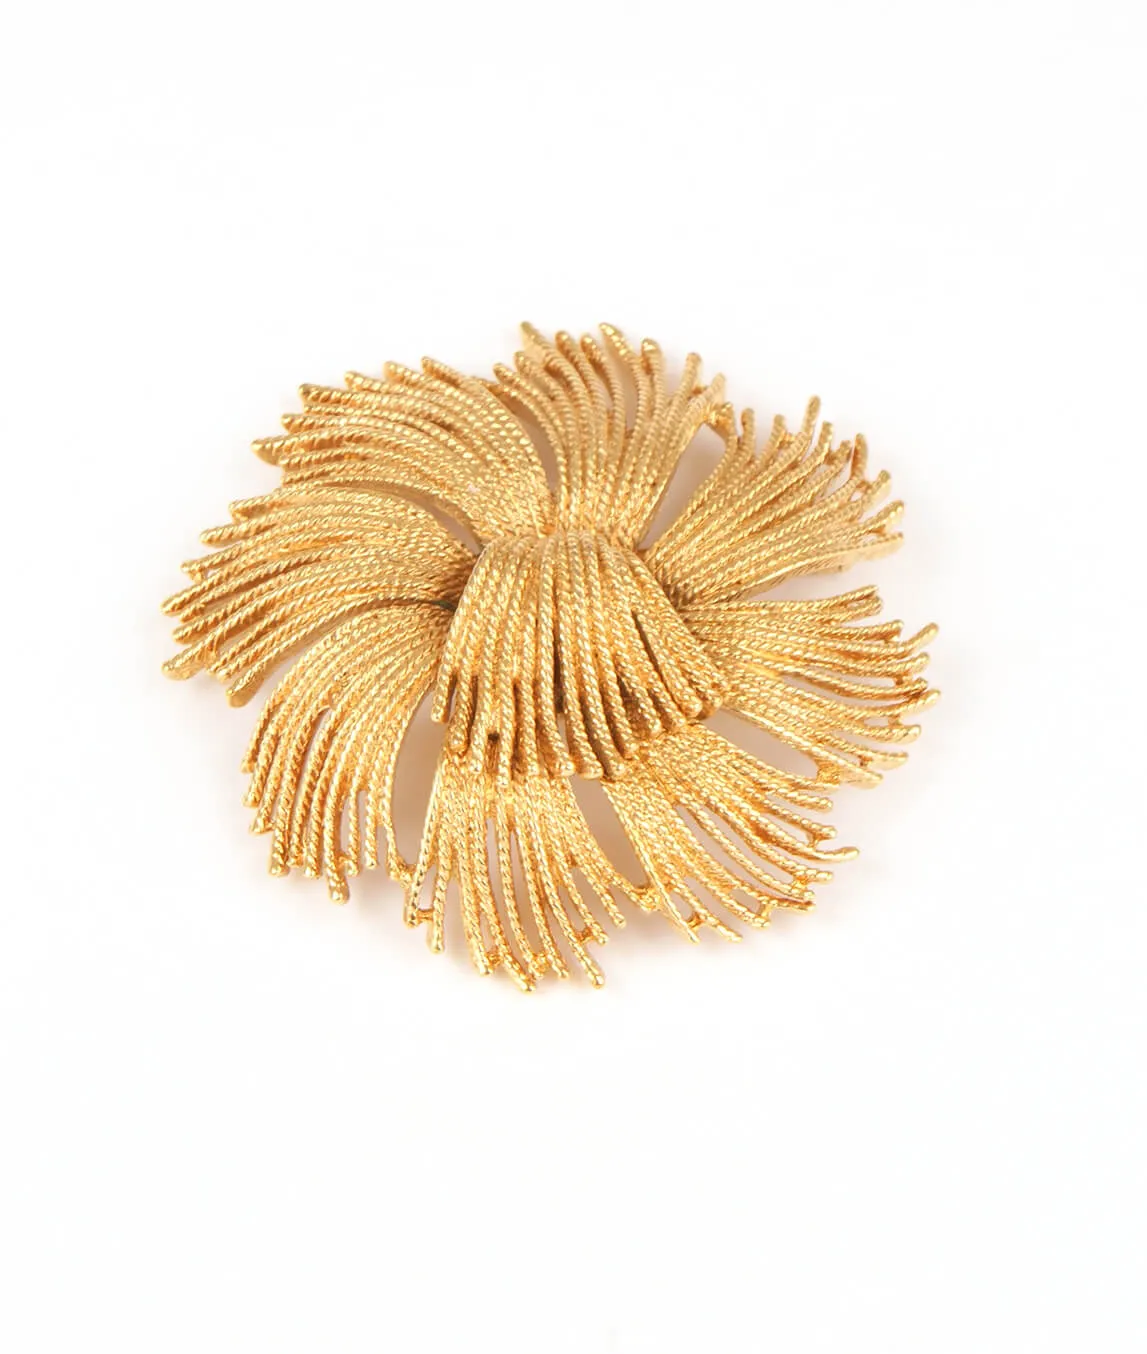 Monet gold plated Cordelia brooch 1960s